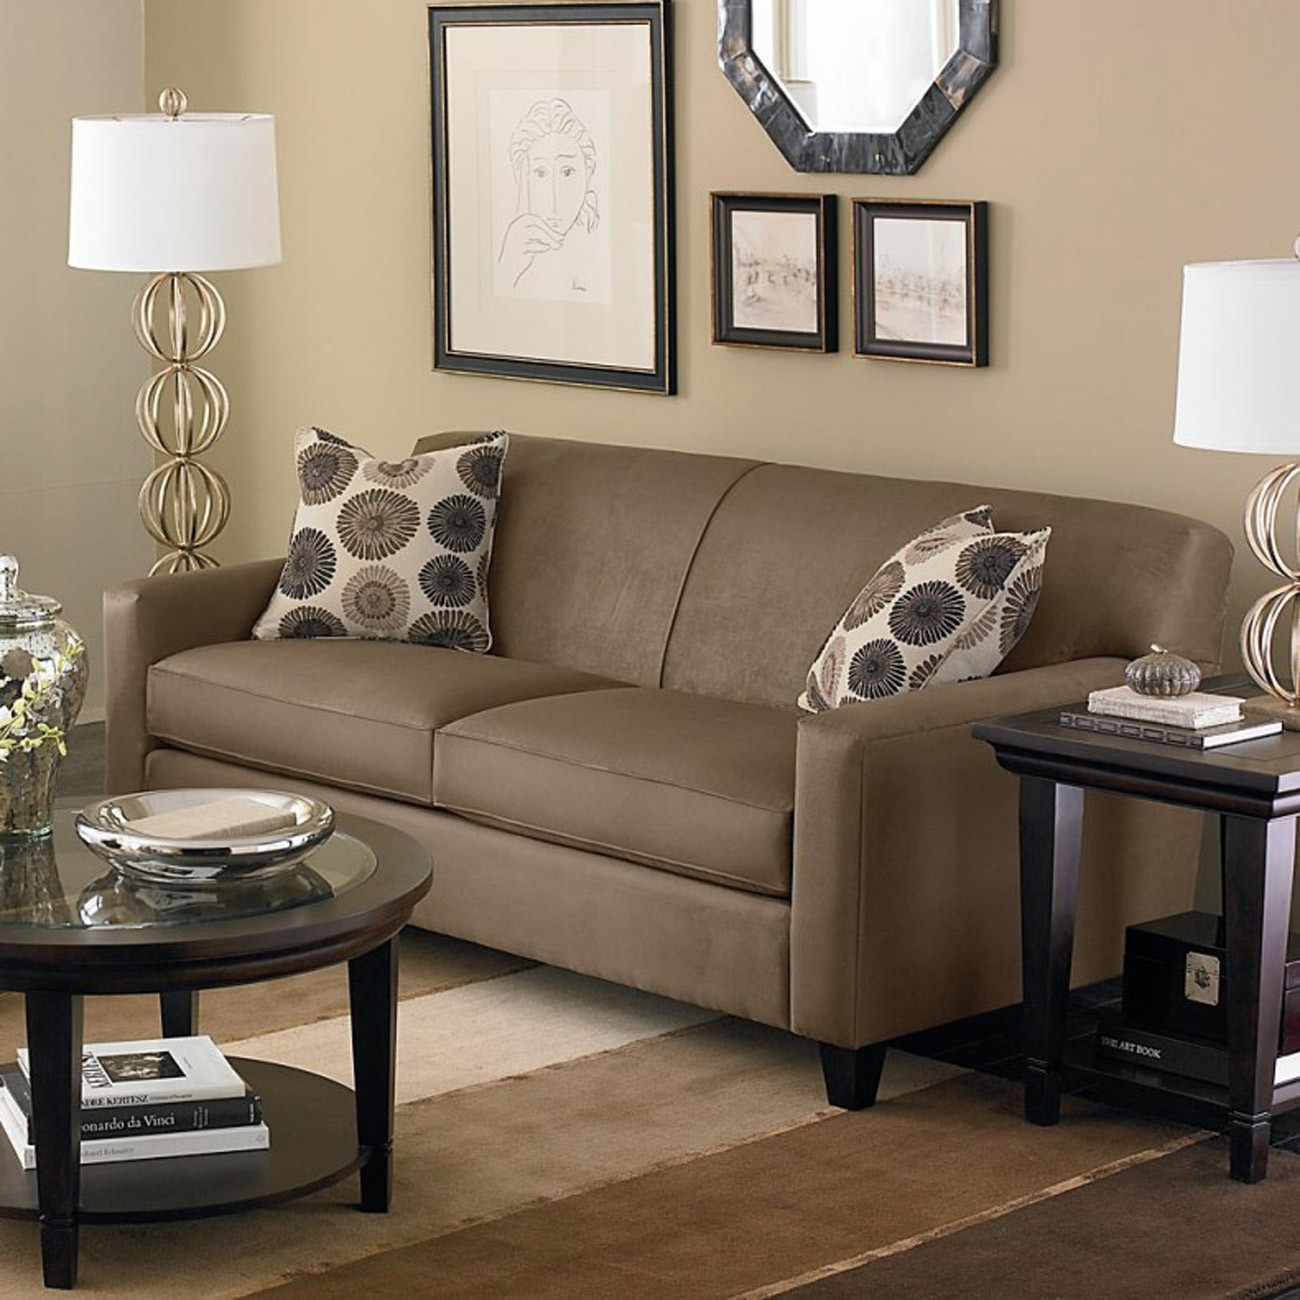 Couches For Small Living Room
 Find Suitable Living Room Furniture With Your Style